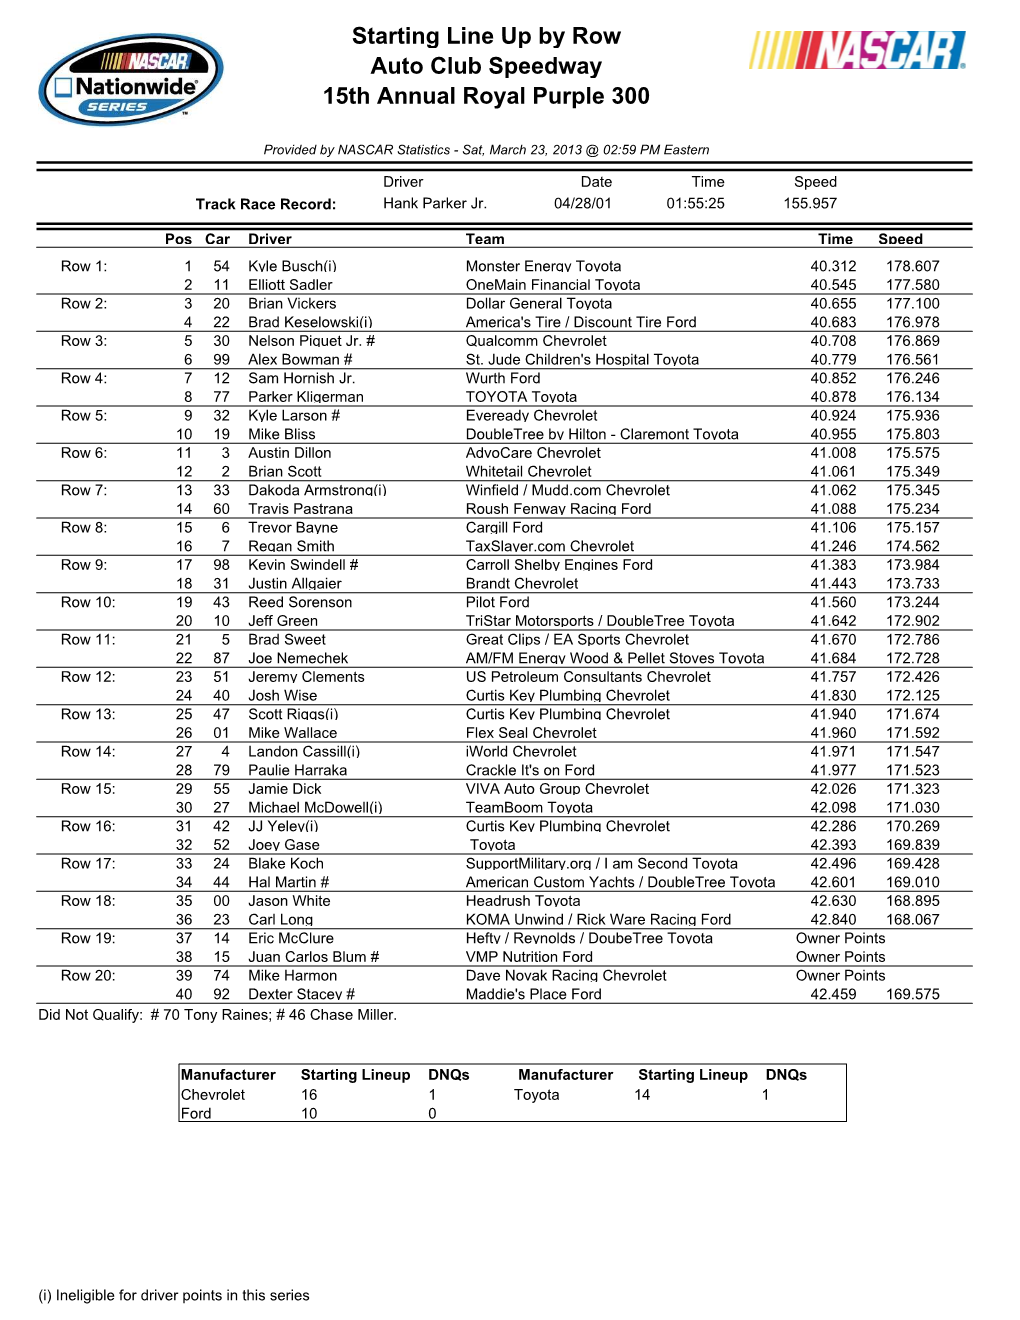 Starting Line up by Row Auto Club Speedway 15Th Annual Royal Purple 300